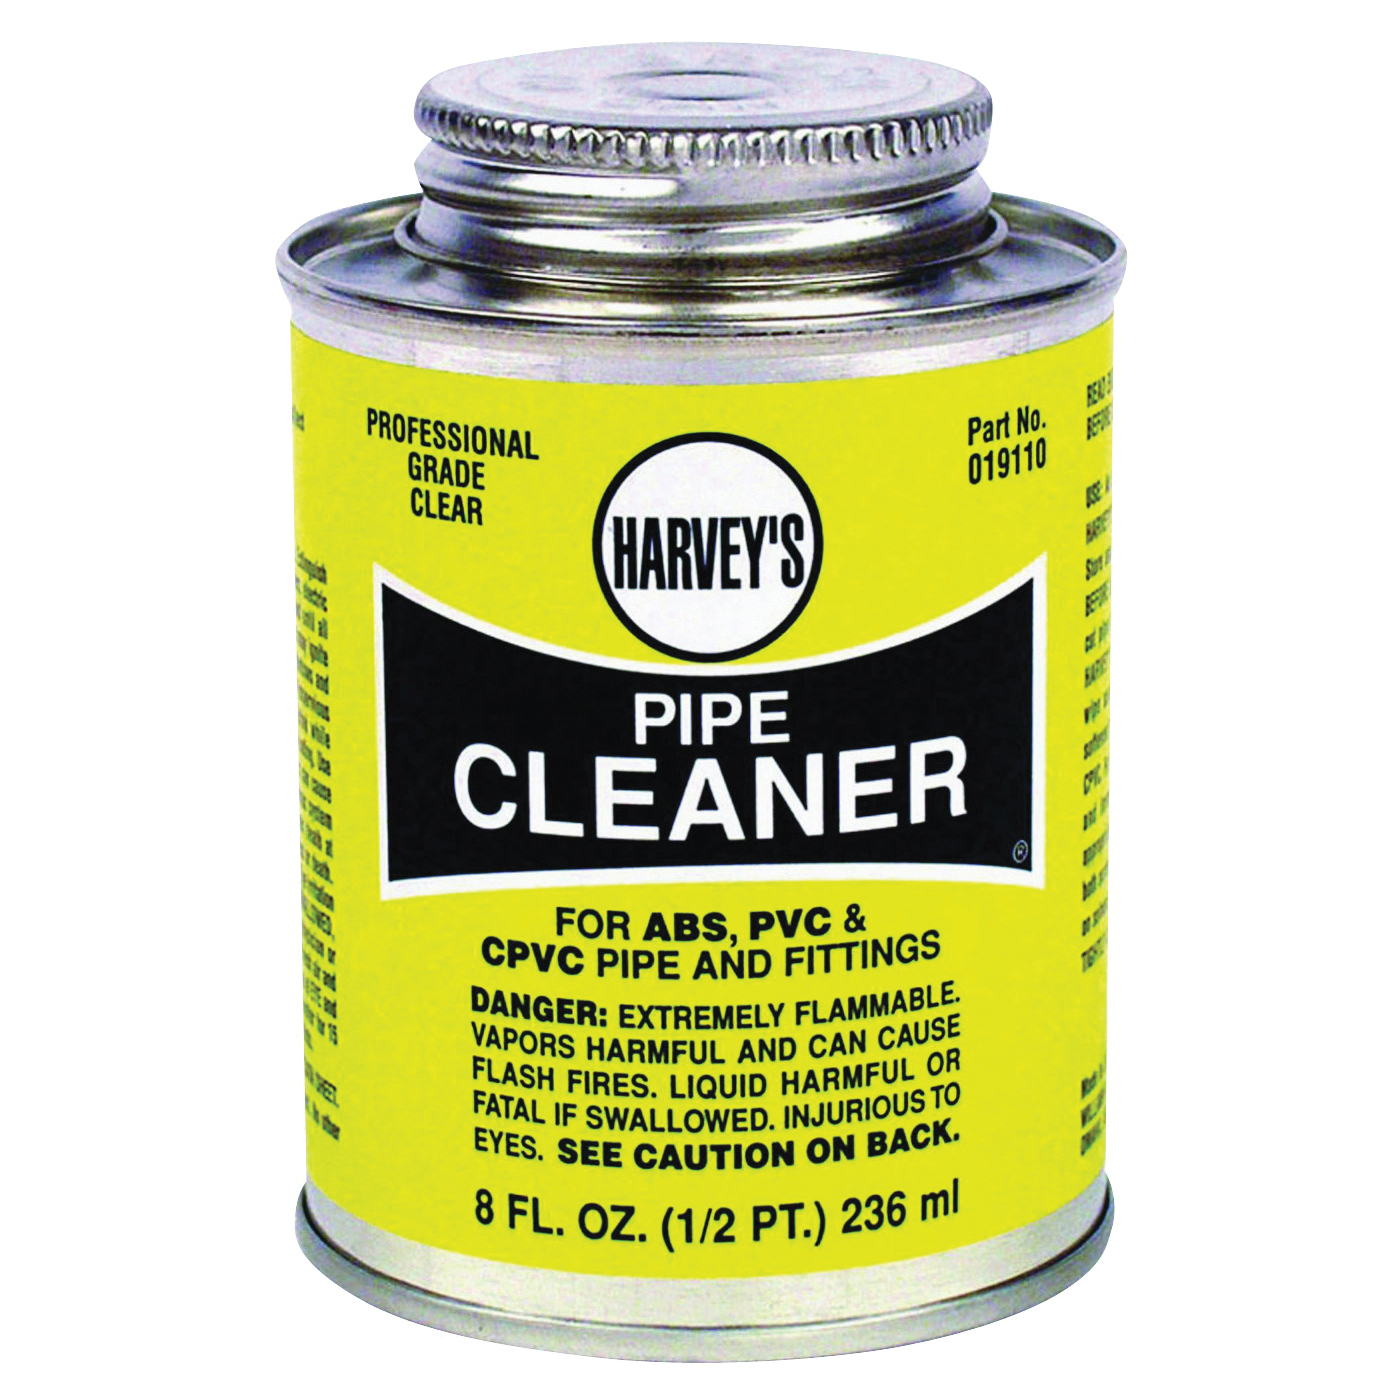 019110-24 Pipe Cleaner, Liquid, Clear, 8 oz Can